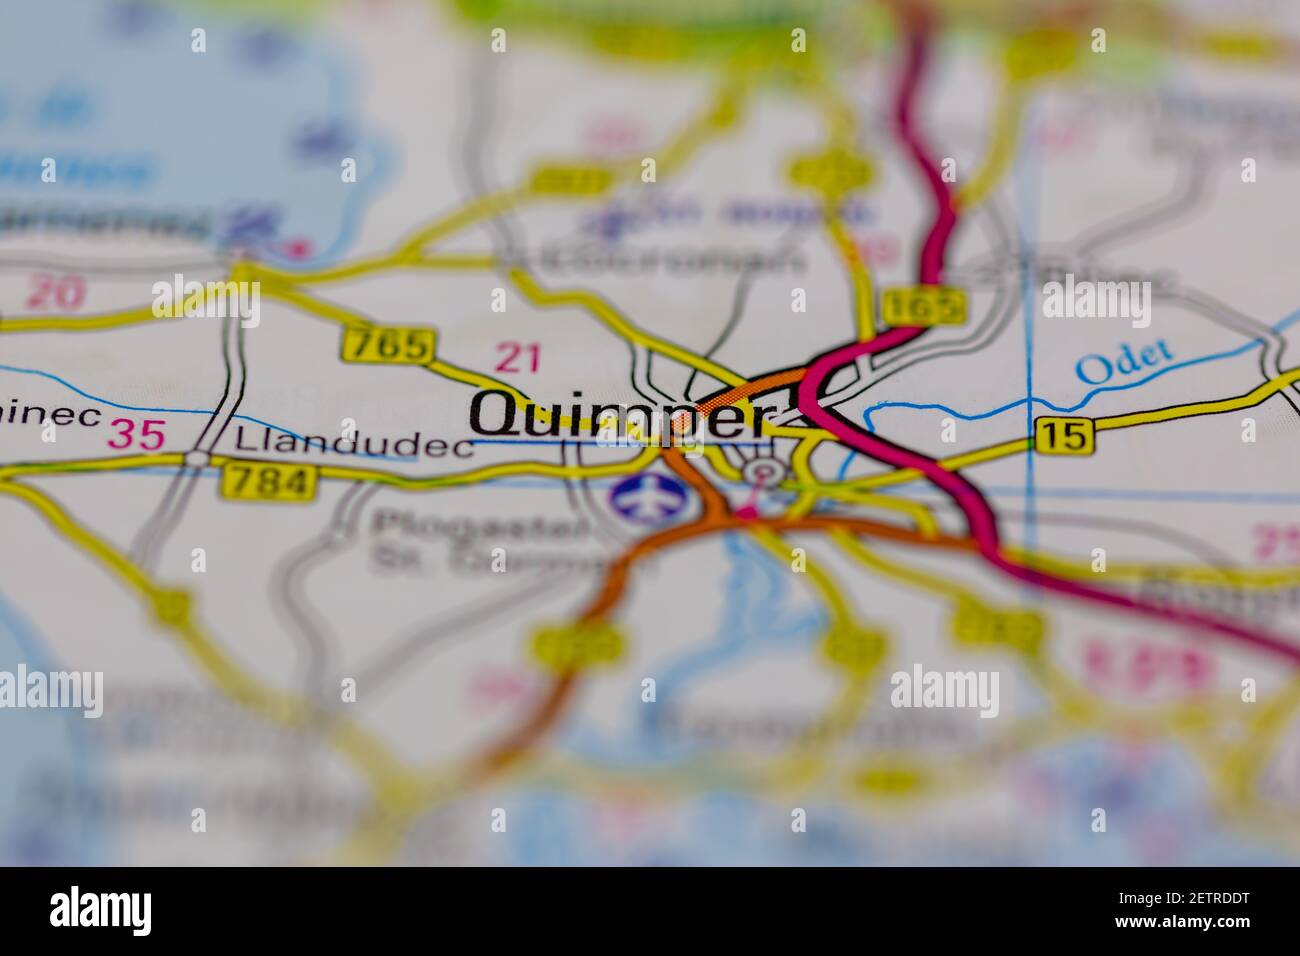 Quimper Shown on a road map or Geography map and atlas Stock Photo